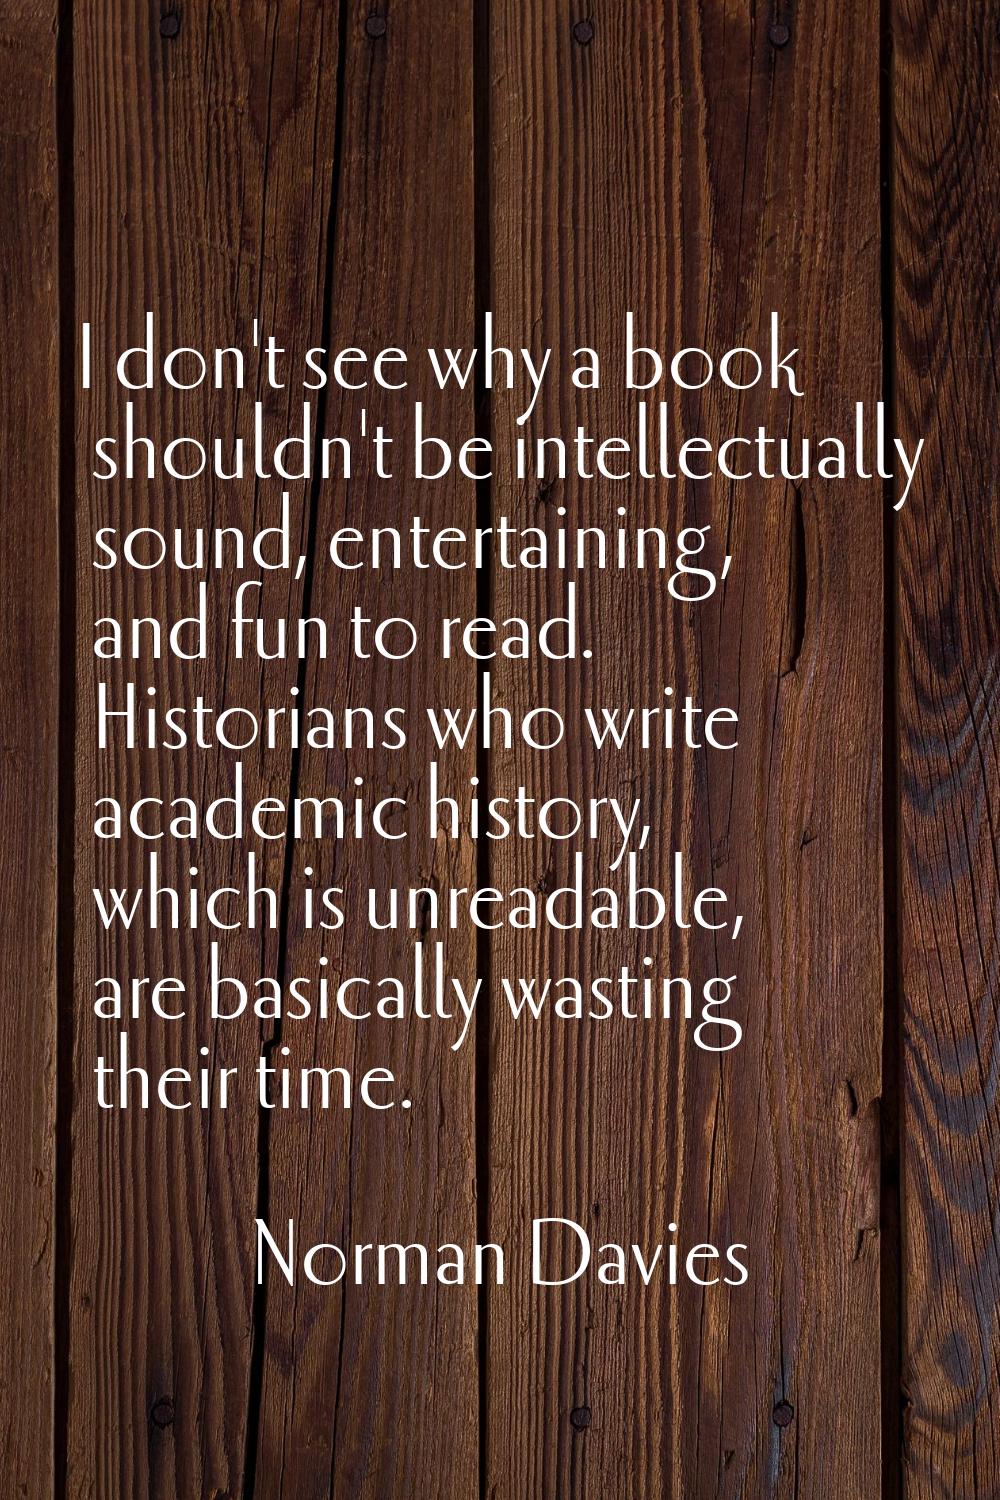 I don't see why a book shouldn't be intellectually sound, entertaining, and fun to read. Historians